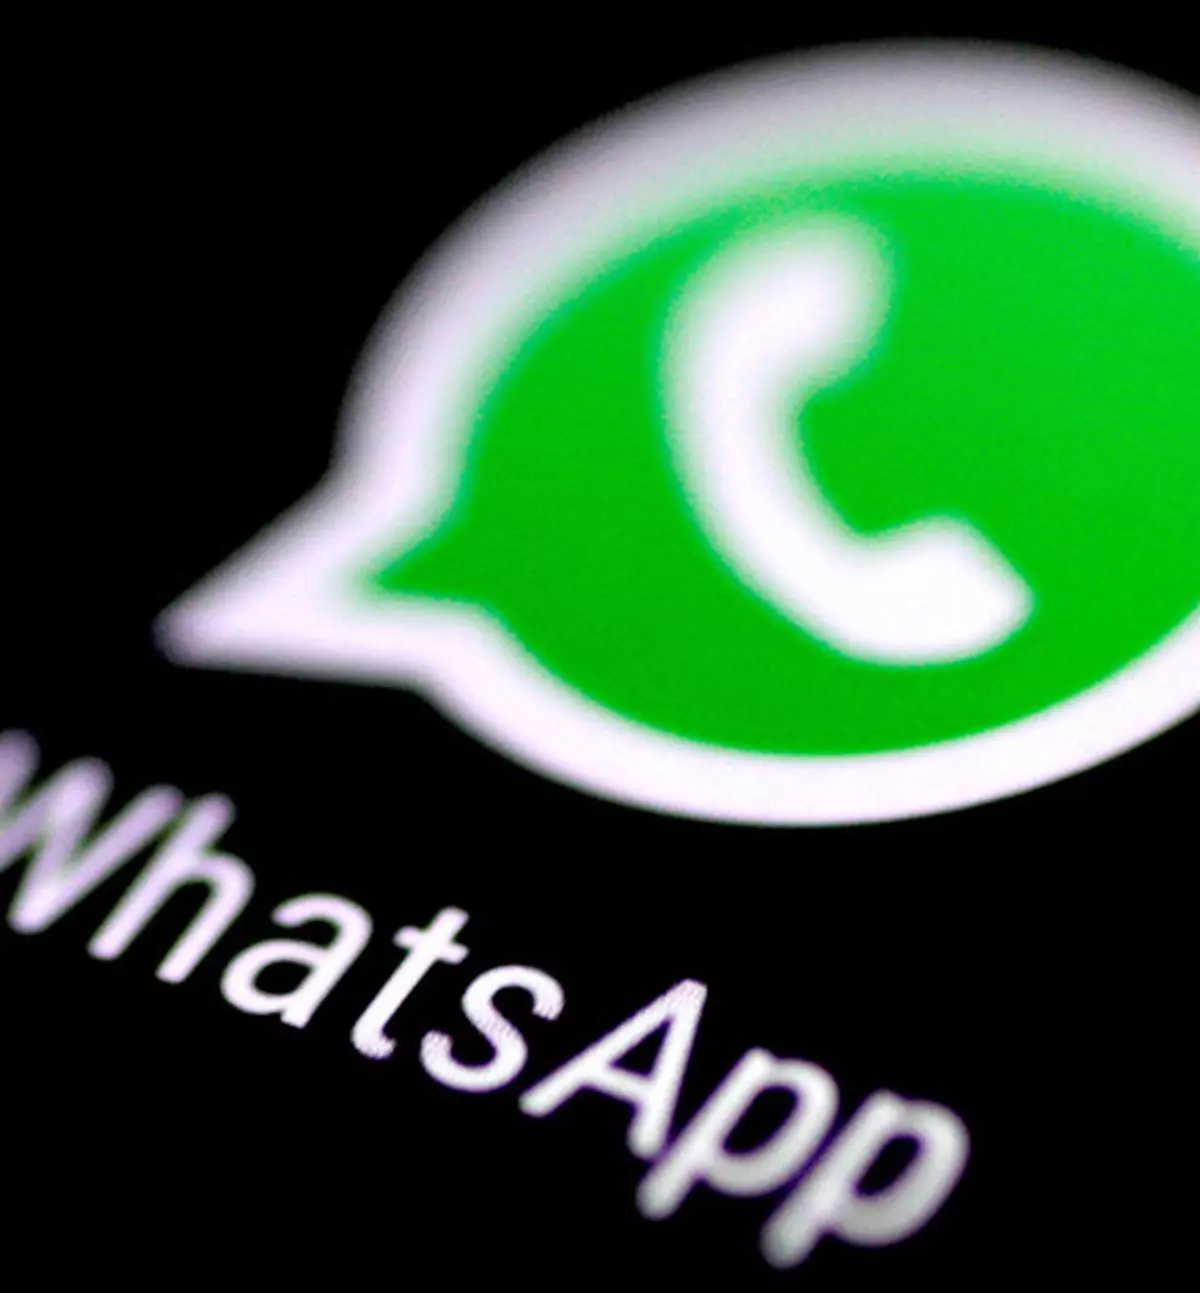 The WhatsApp logo messaging application is seen on a phone screen